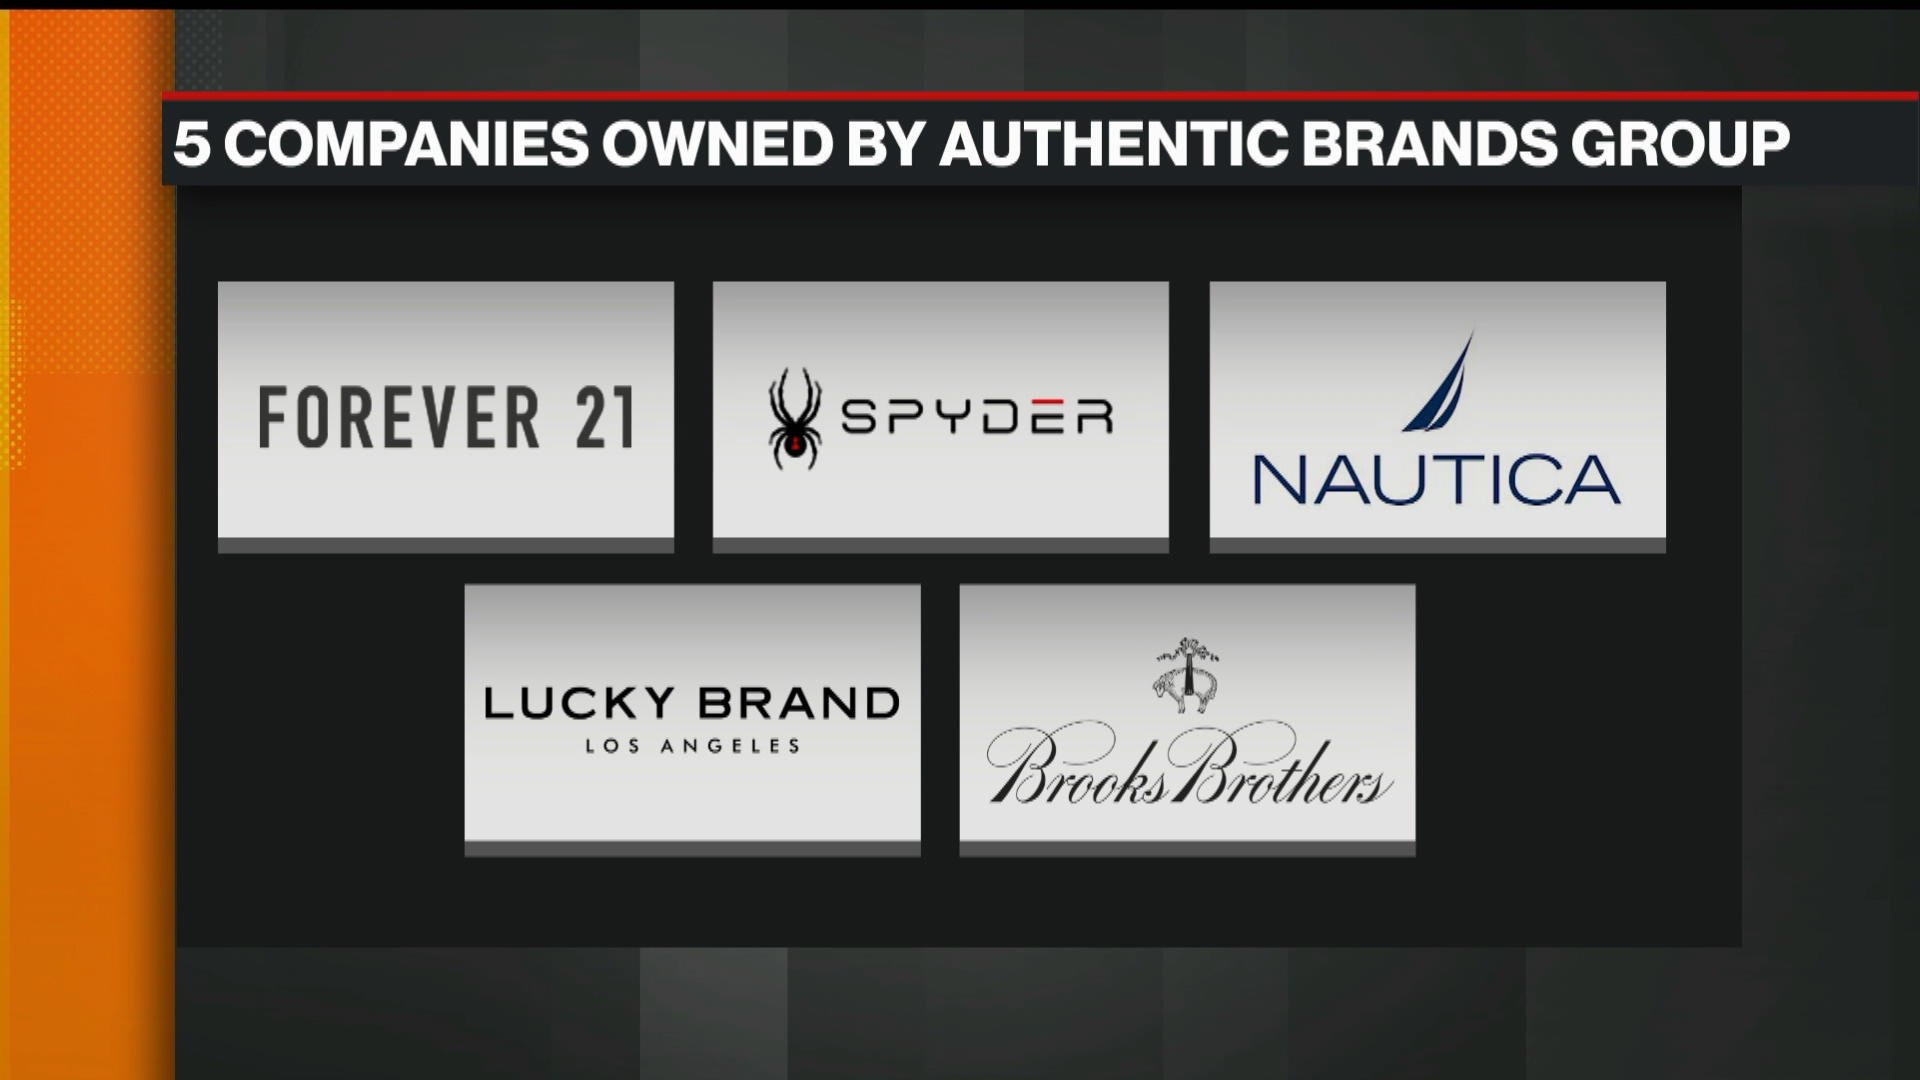 Authentic Brands Group Partners with Sport Dimension to Introduce